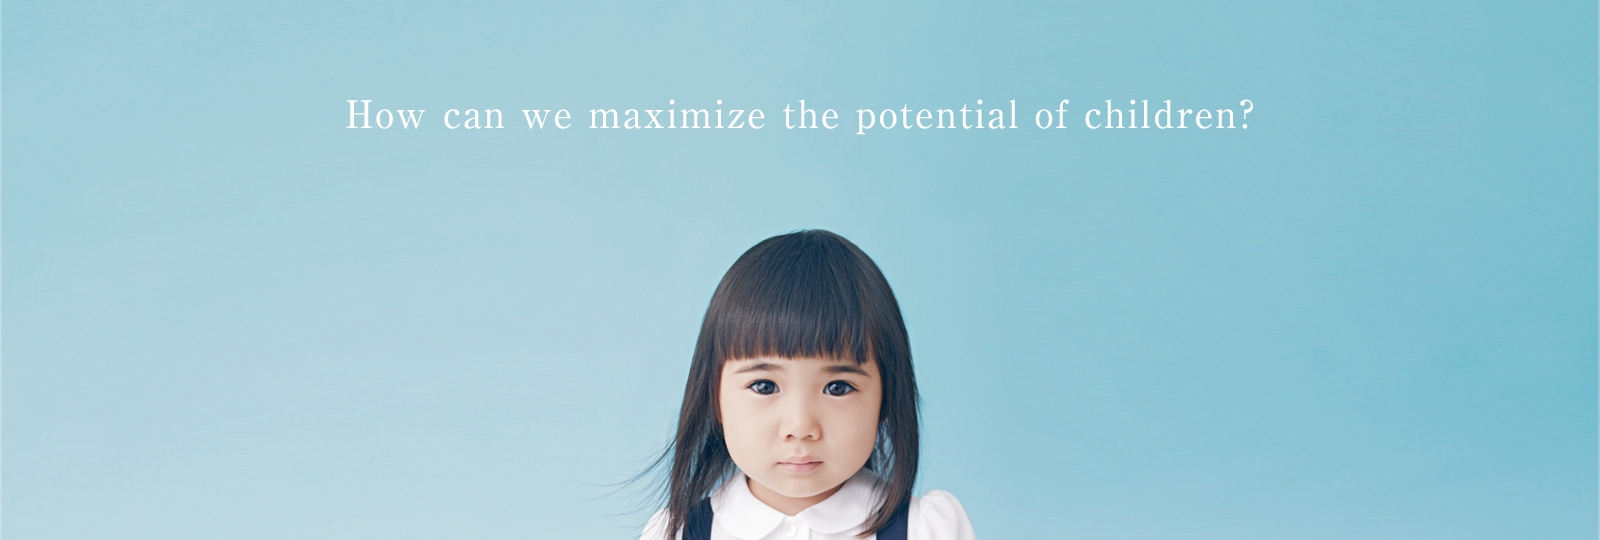 How can we maximize the potential of children?